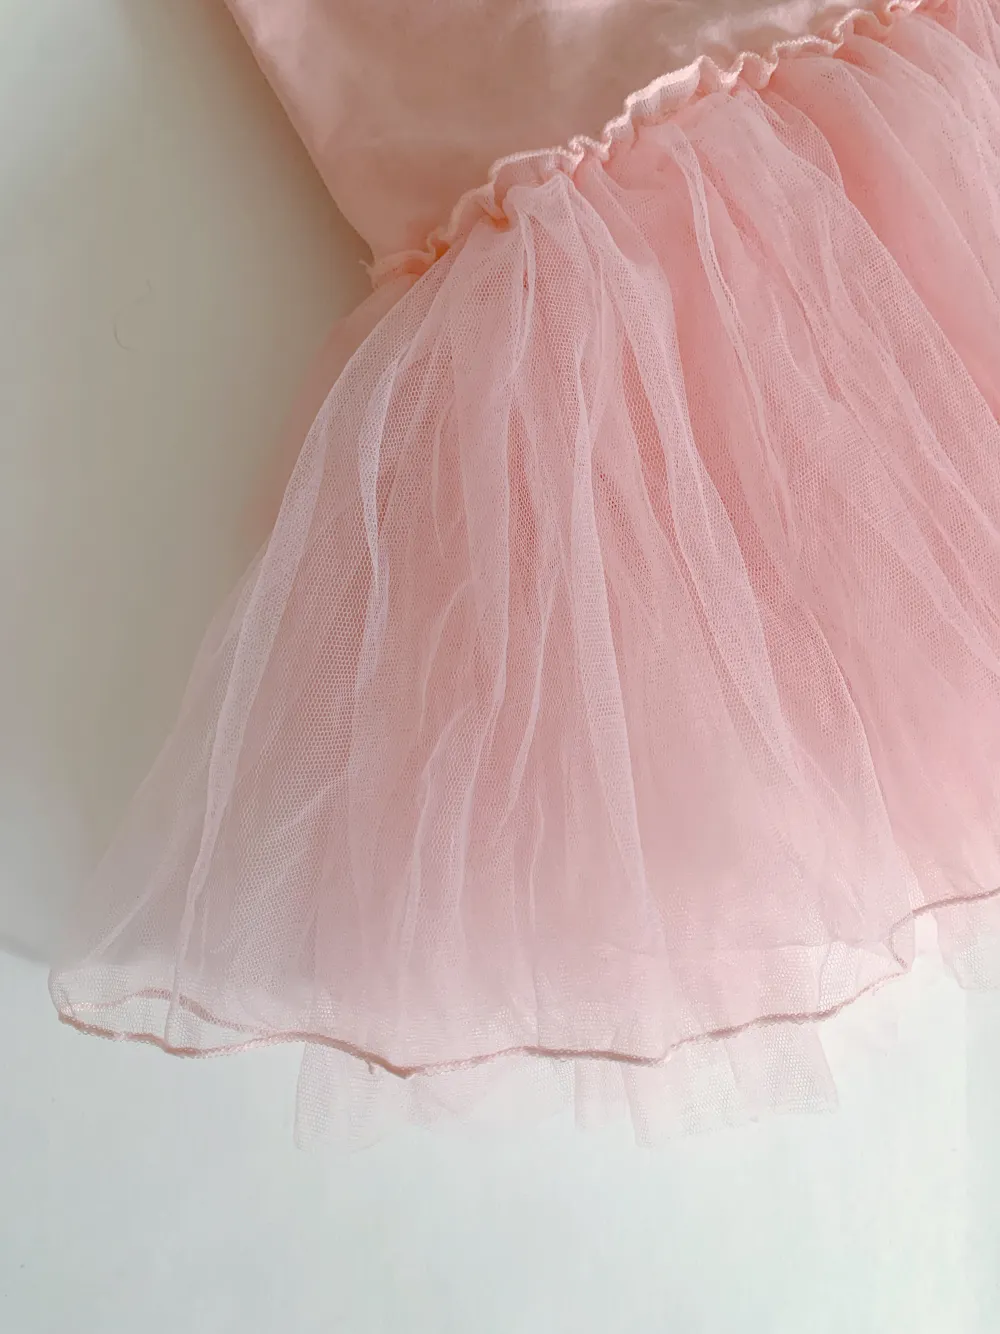 - Cotton for the body part  - Condition: 90% new  - Soft tulle . Klänningar.